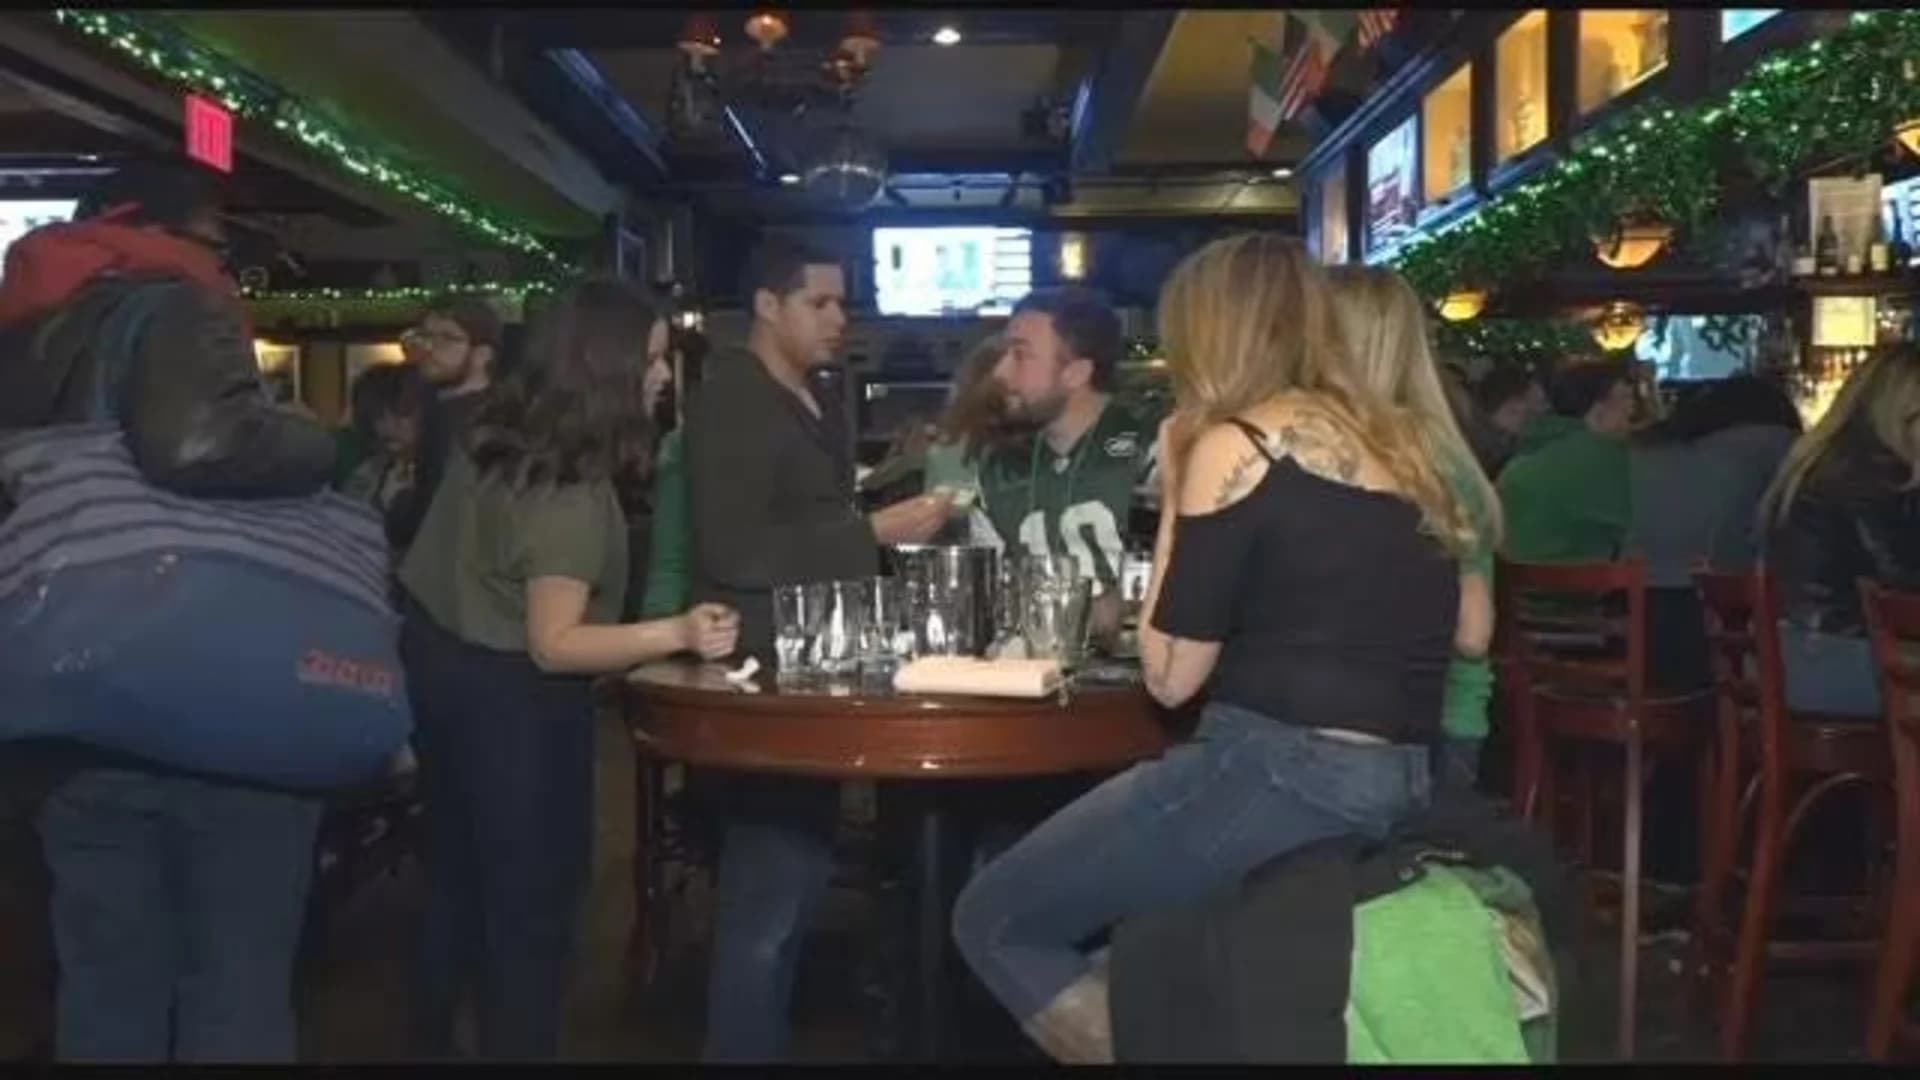 Woodlawn residents celebrate St. Patrick's Day at Irish pubs